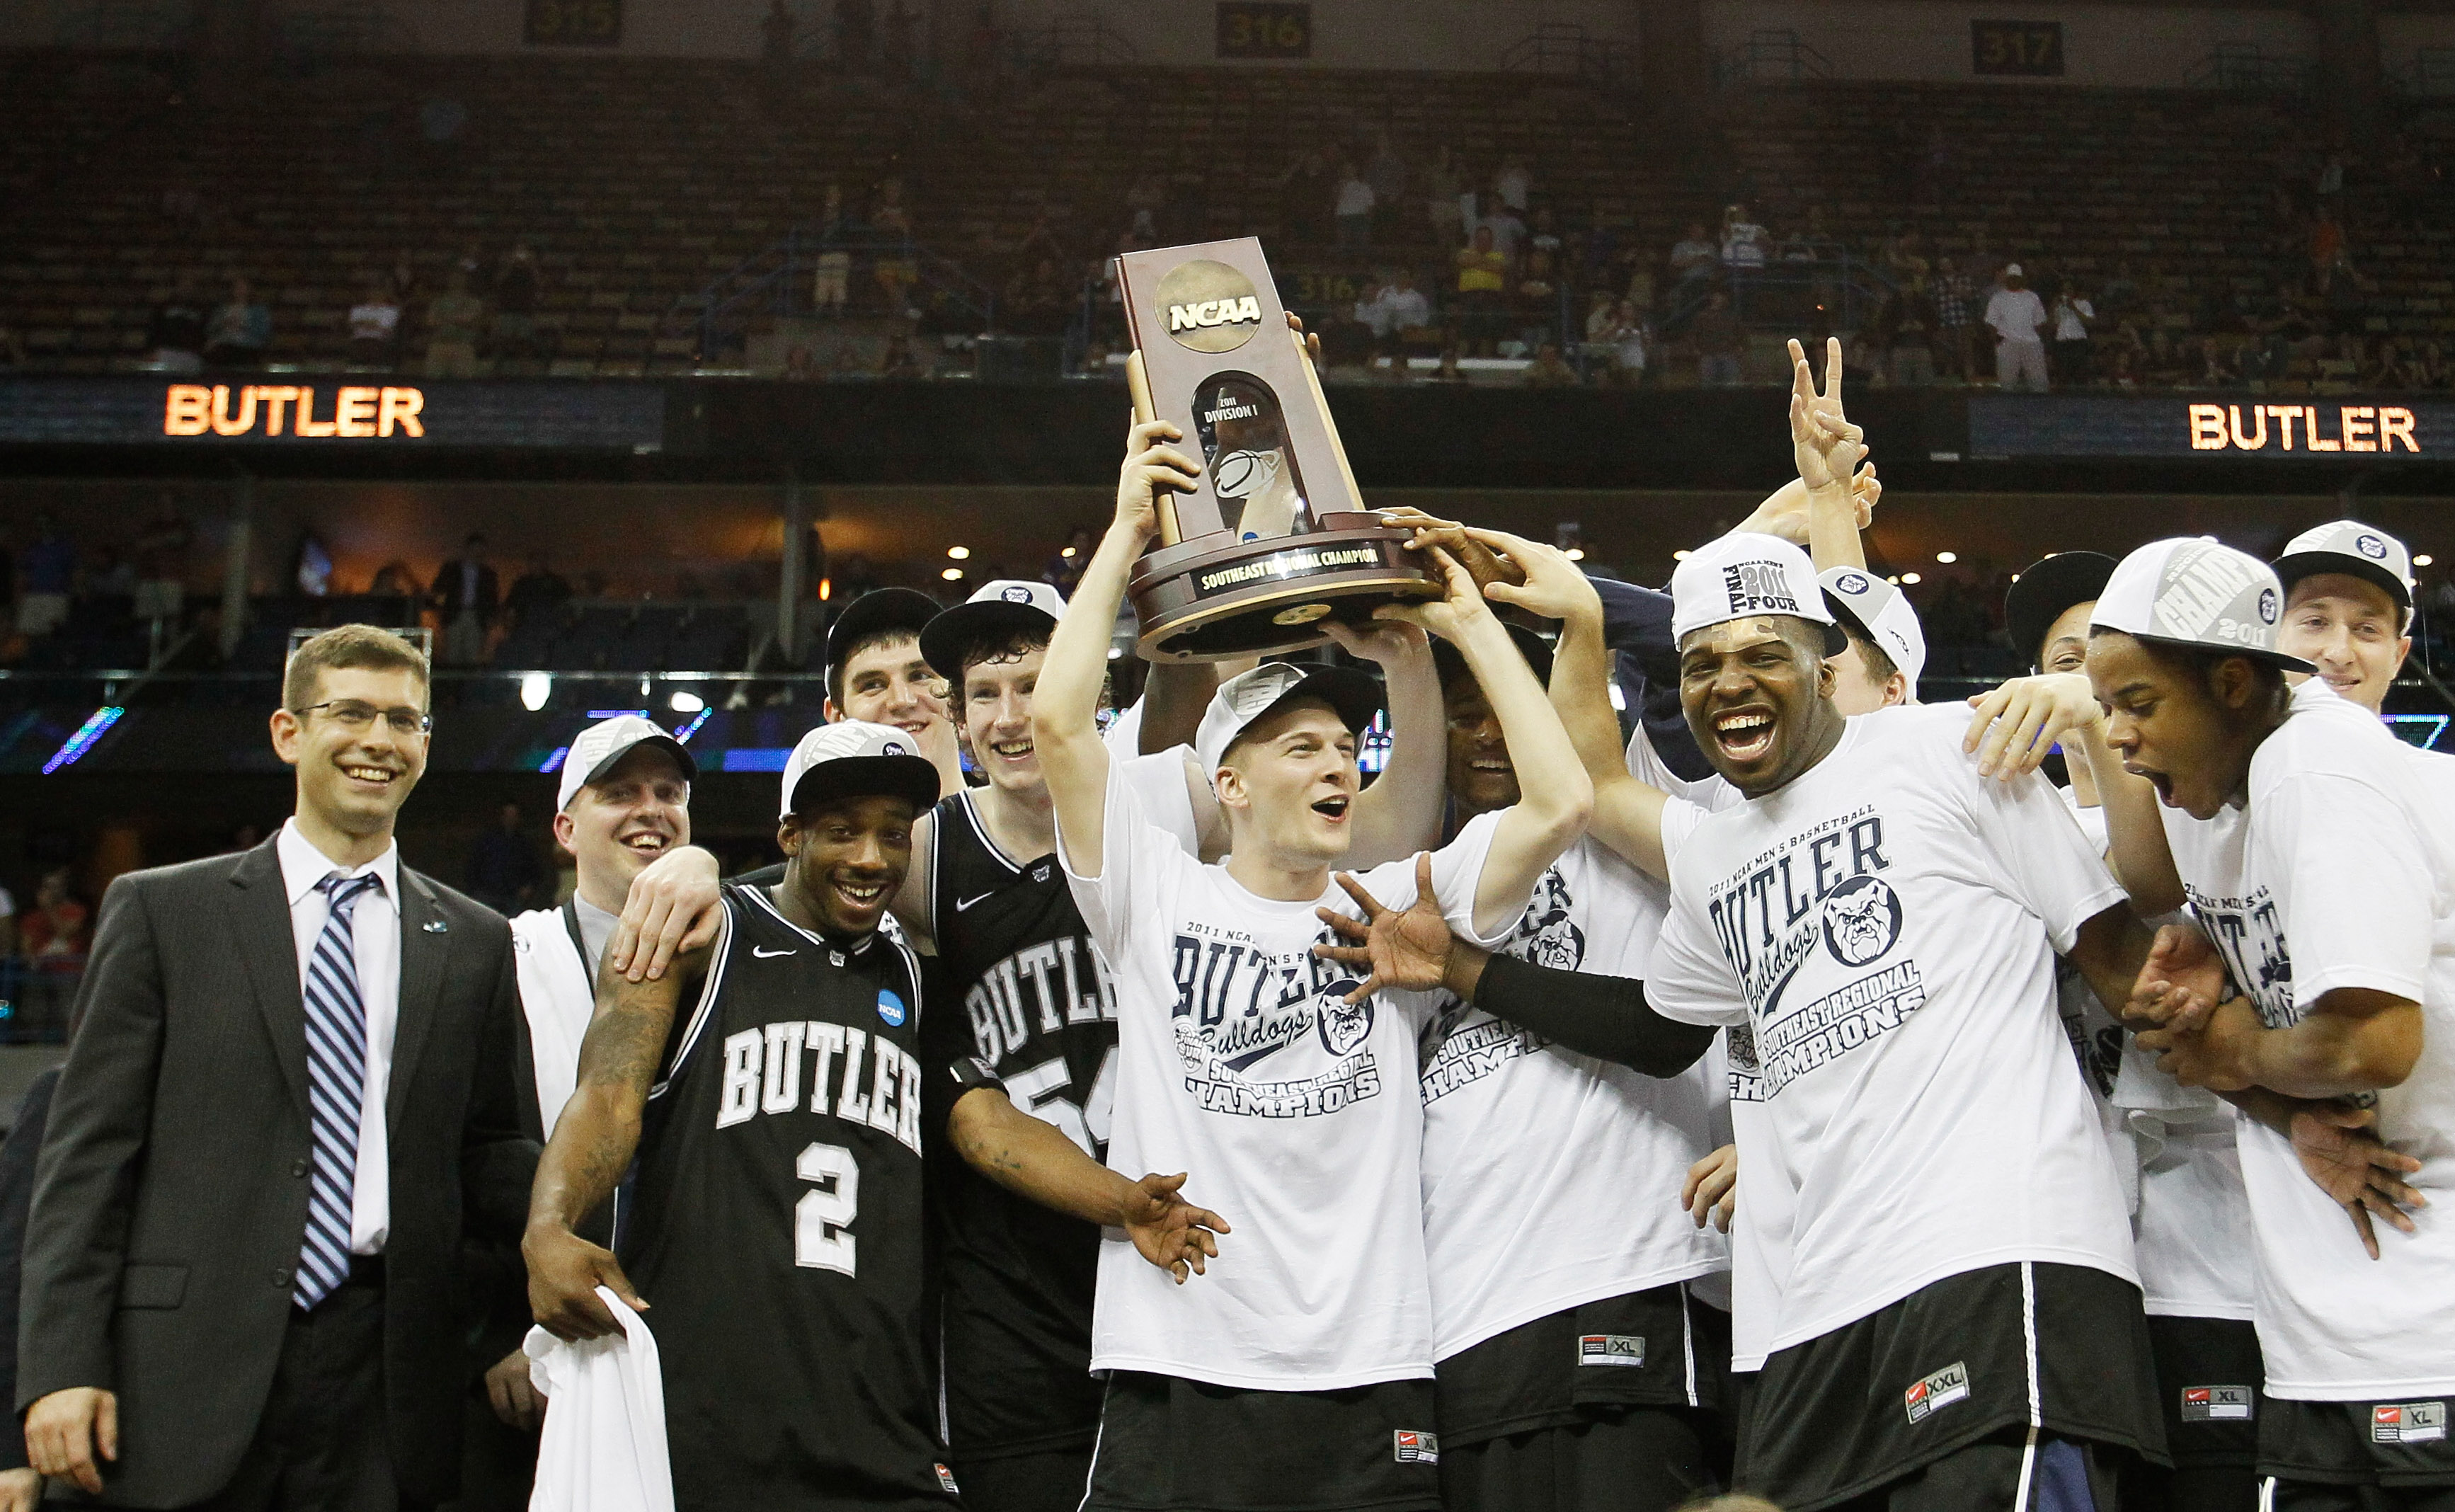 NEW ORLEANS, LA - MARCH 26:  The Butler Bulldogs celebrate with the trophy after defeating the Florida Gators 74 to 71 in overtime during the Southeast regional final of the 2011 NCAA men's basketball tournament at New Orleans Arena on March 26, 2011 in N